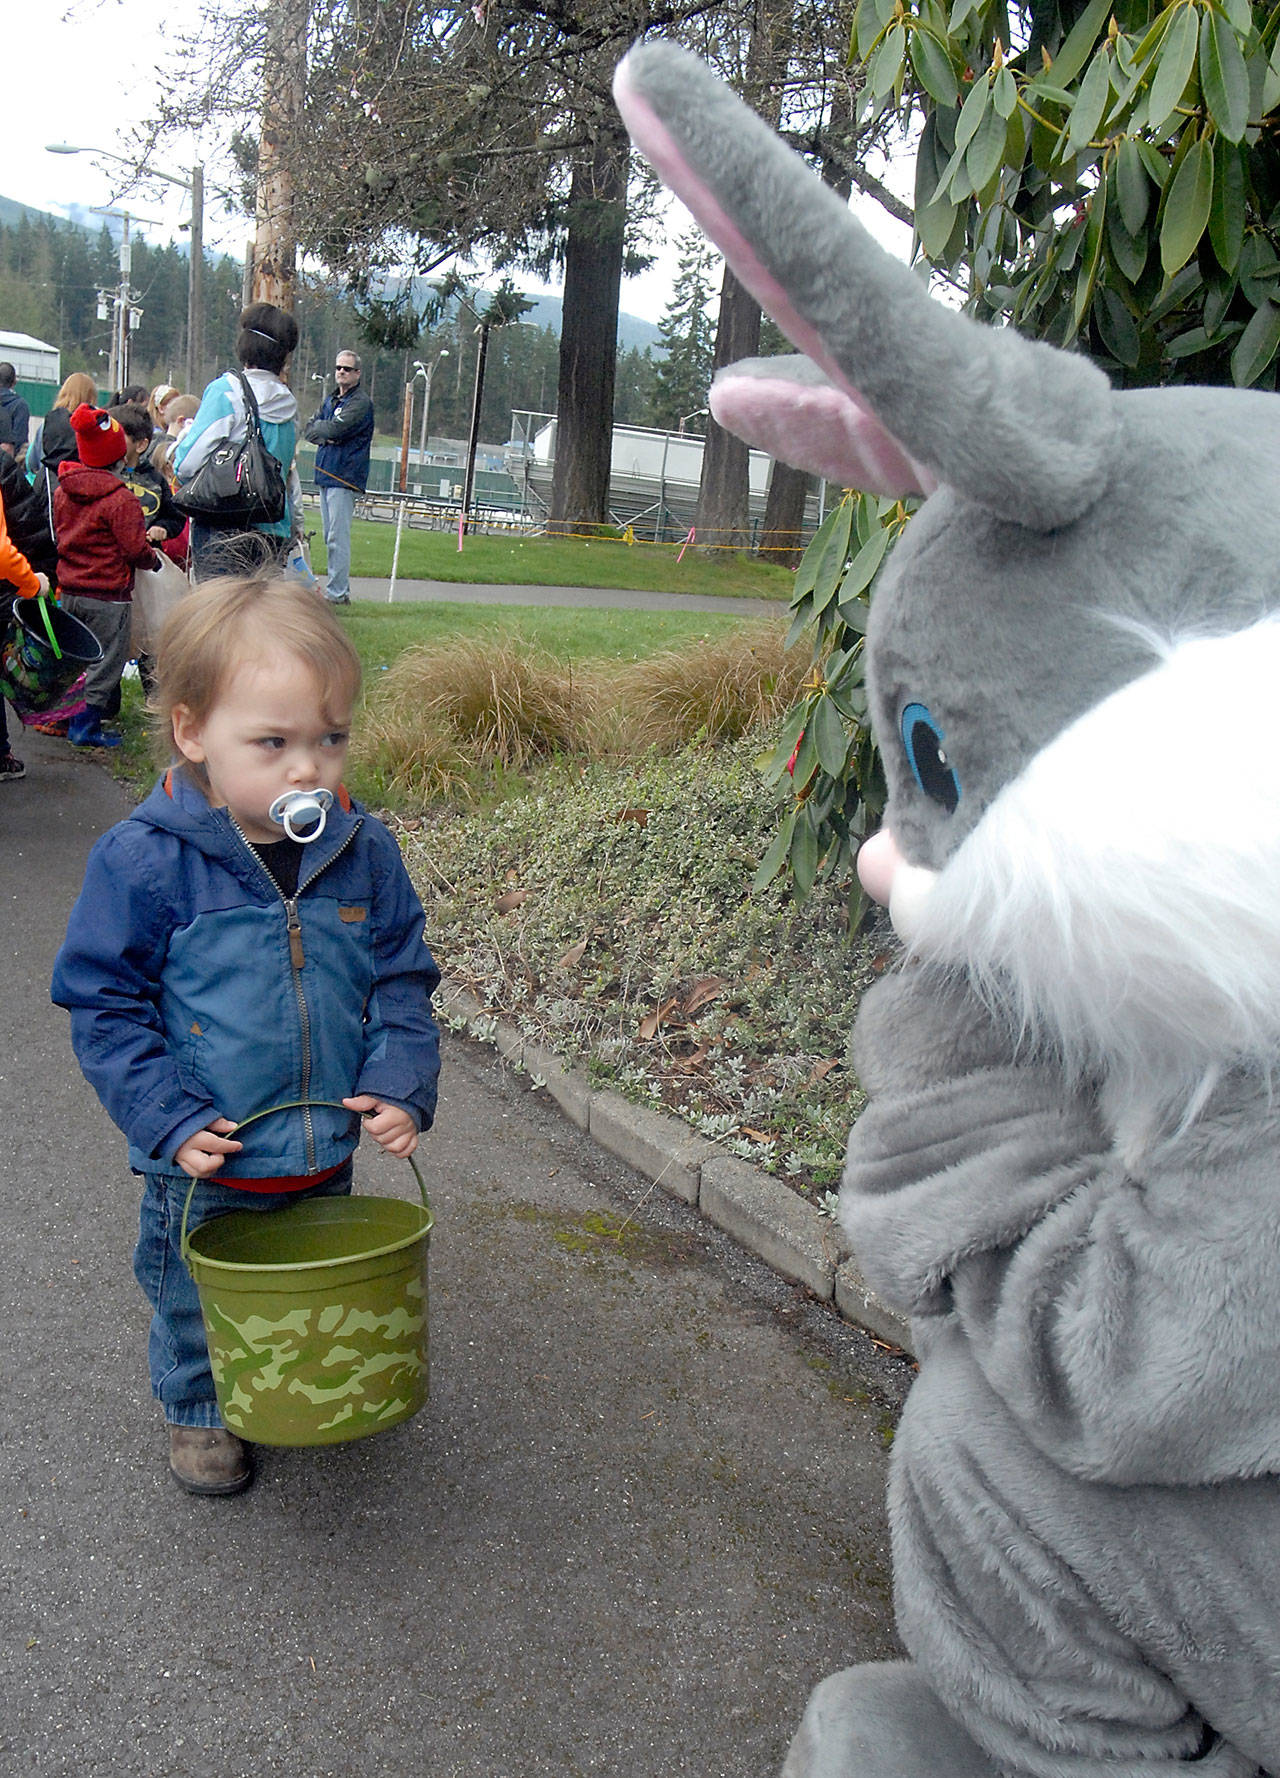 Two-year-old Nason Henning of Port Angeles casts a wary glance at the Easter Bunny, portrayed by Makena Merideth, before the start of the 39th annual KONP Easter egg hunt at the Clallam County Fairgrounds in Port Angeles on Saturday. (Keith Thorpe/Peninsula Daily News)                                Two-year-old Nason Henning of Port Angeles casts a wary glance at the Easter Bunny, portrayed by Makena Merideth, before the start of the 39th annual KONP Easter egg hunt at the Clallam County Fairgrounds in Port Angeles on Saturday. (Keith Thorpe/Peninsula Daily News)